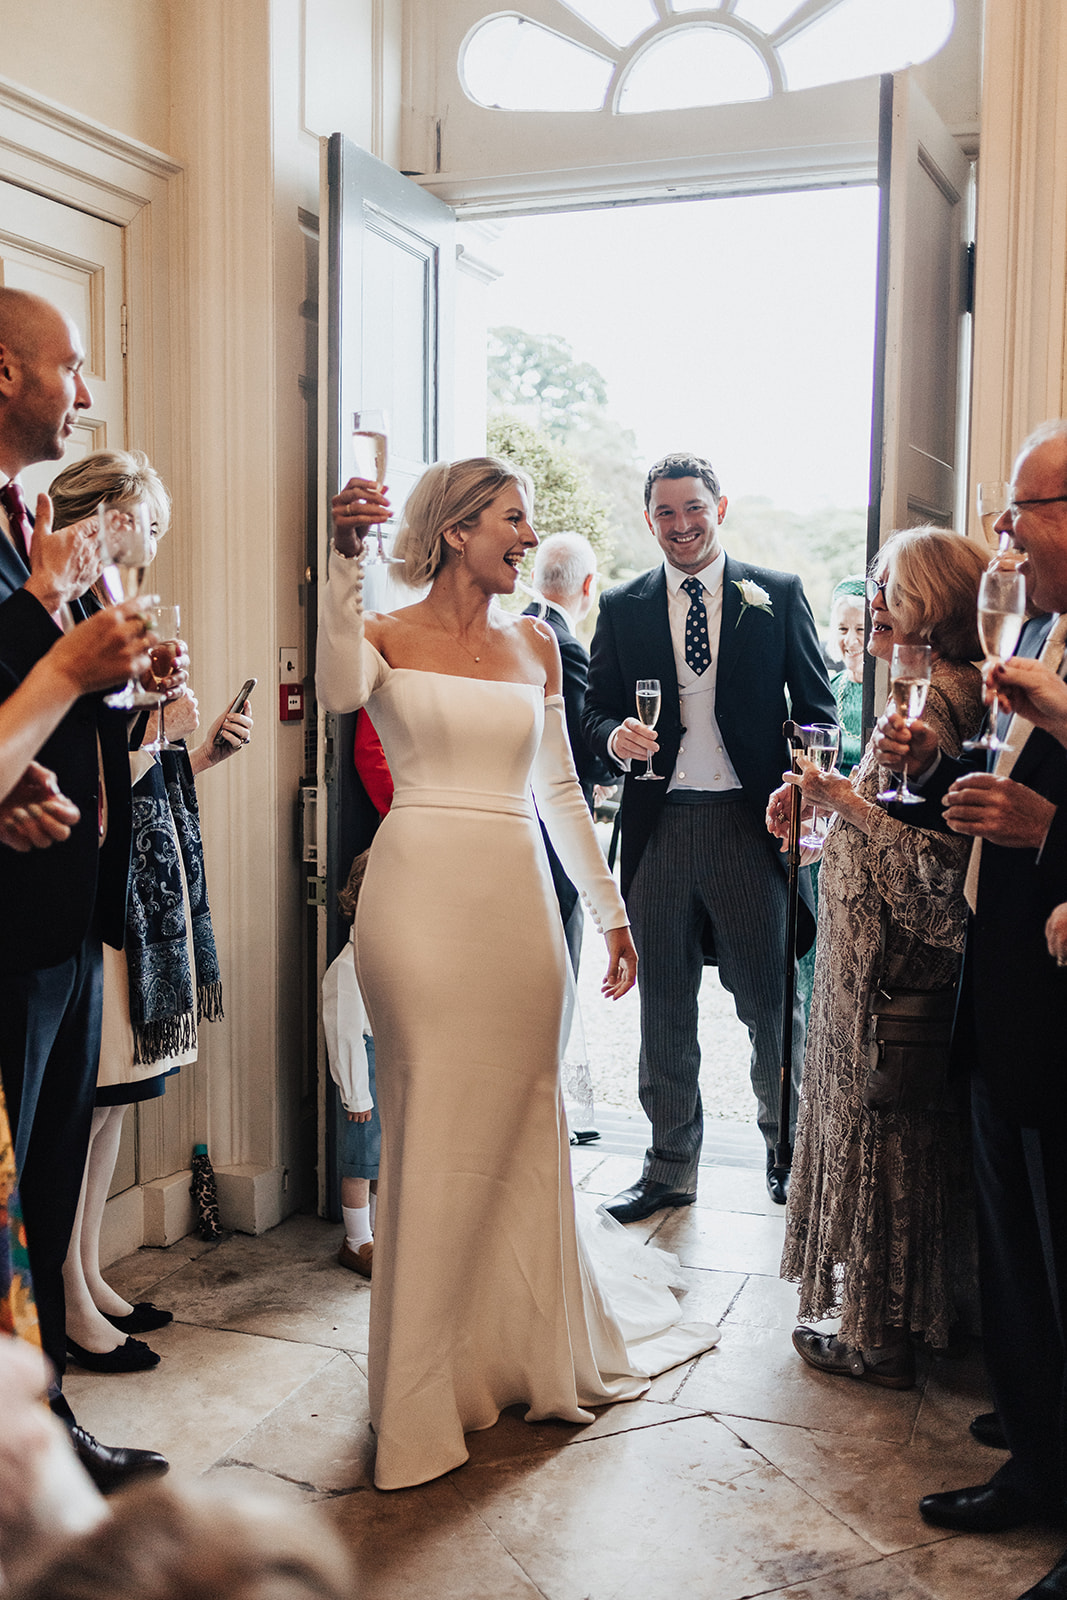 A couples who got married in a modern and stylish editorial wedding in cornwall